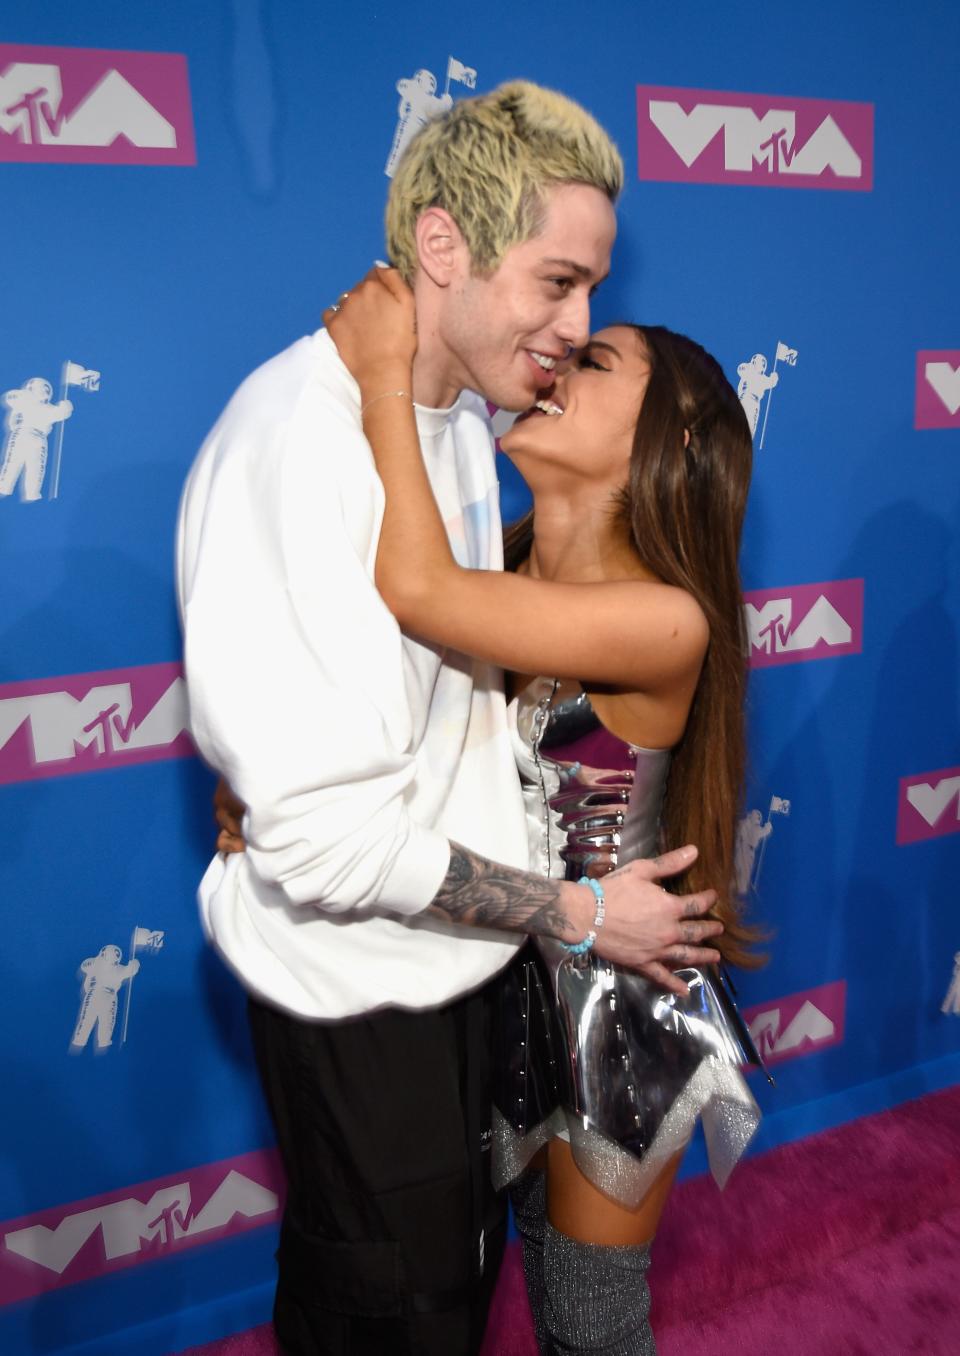 Pete Davidson and Ariana Grande attend the 2018 MTV Video Music Awards in New York. (Kevin Mazur via Getty Images)